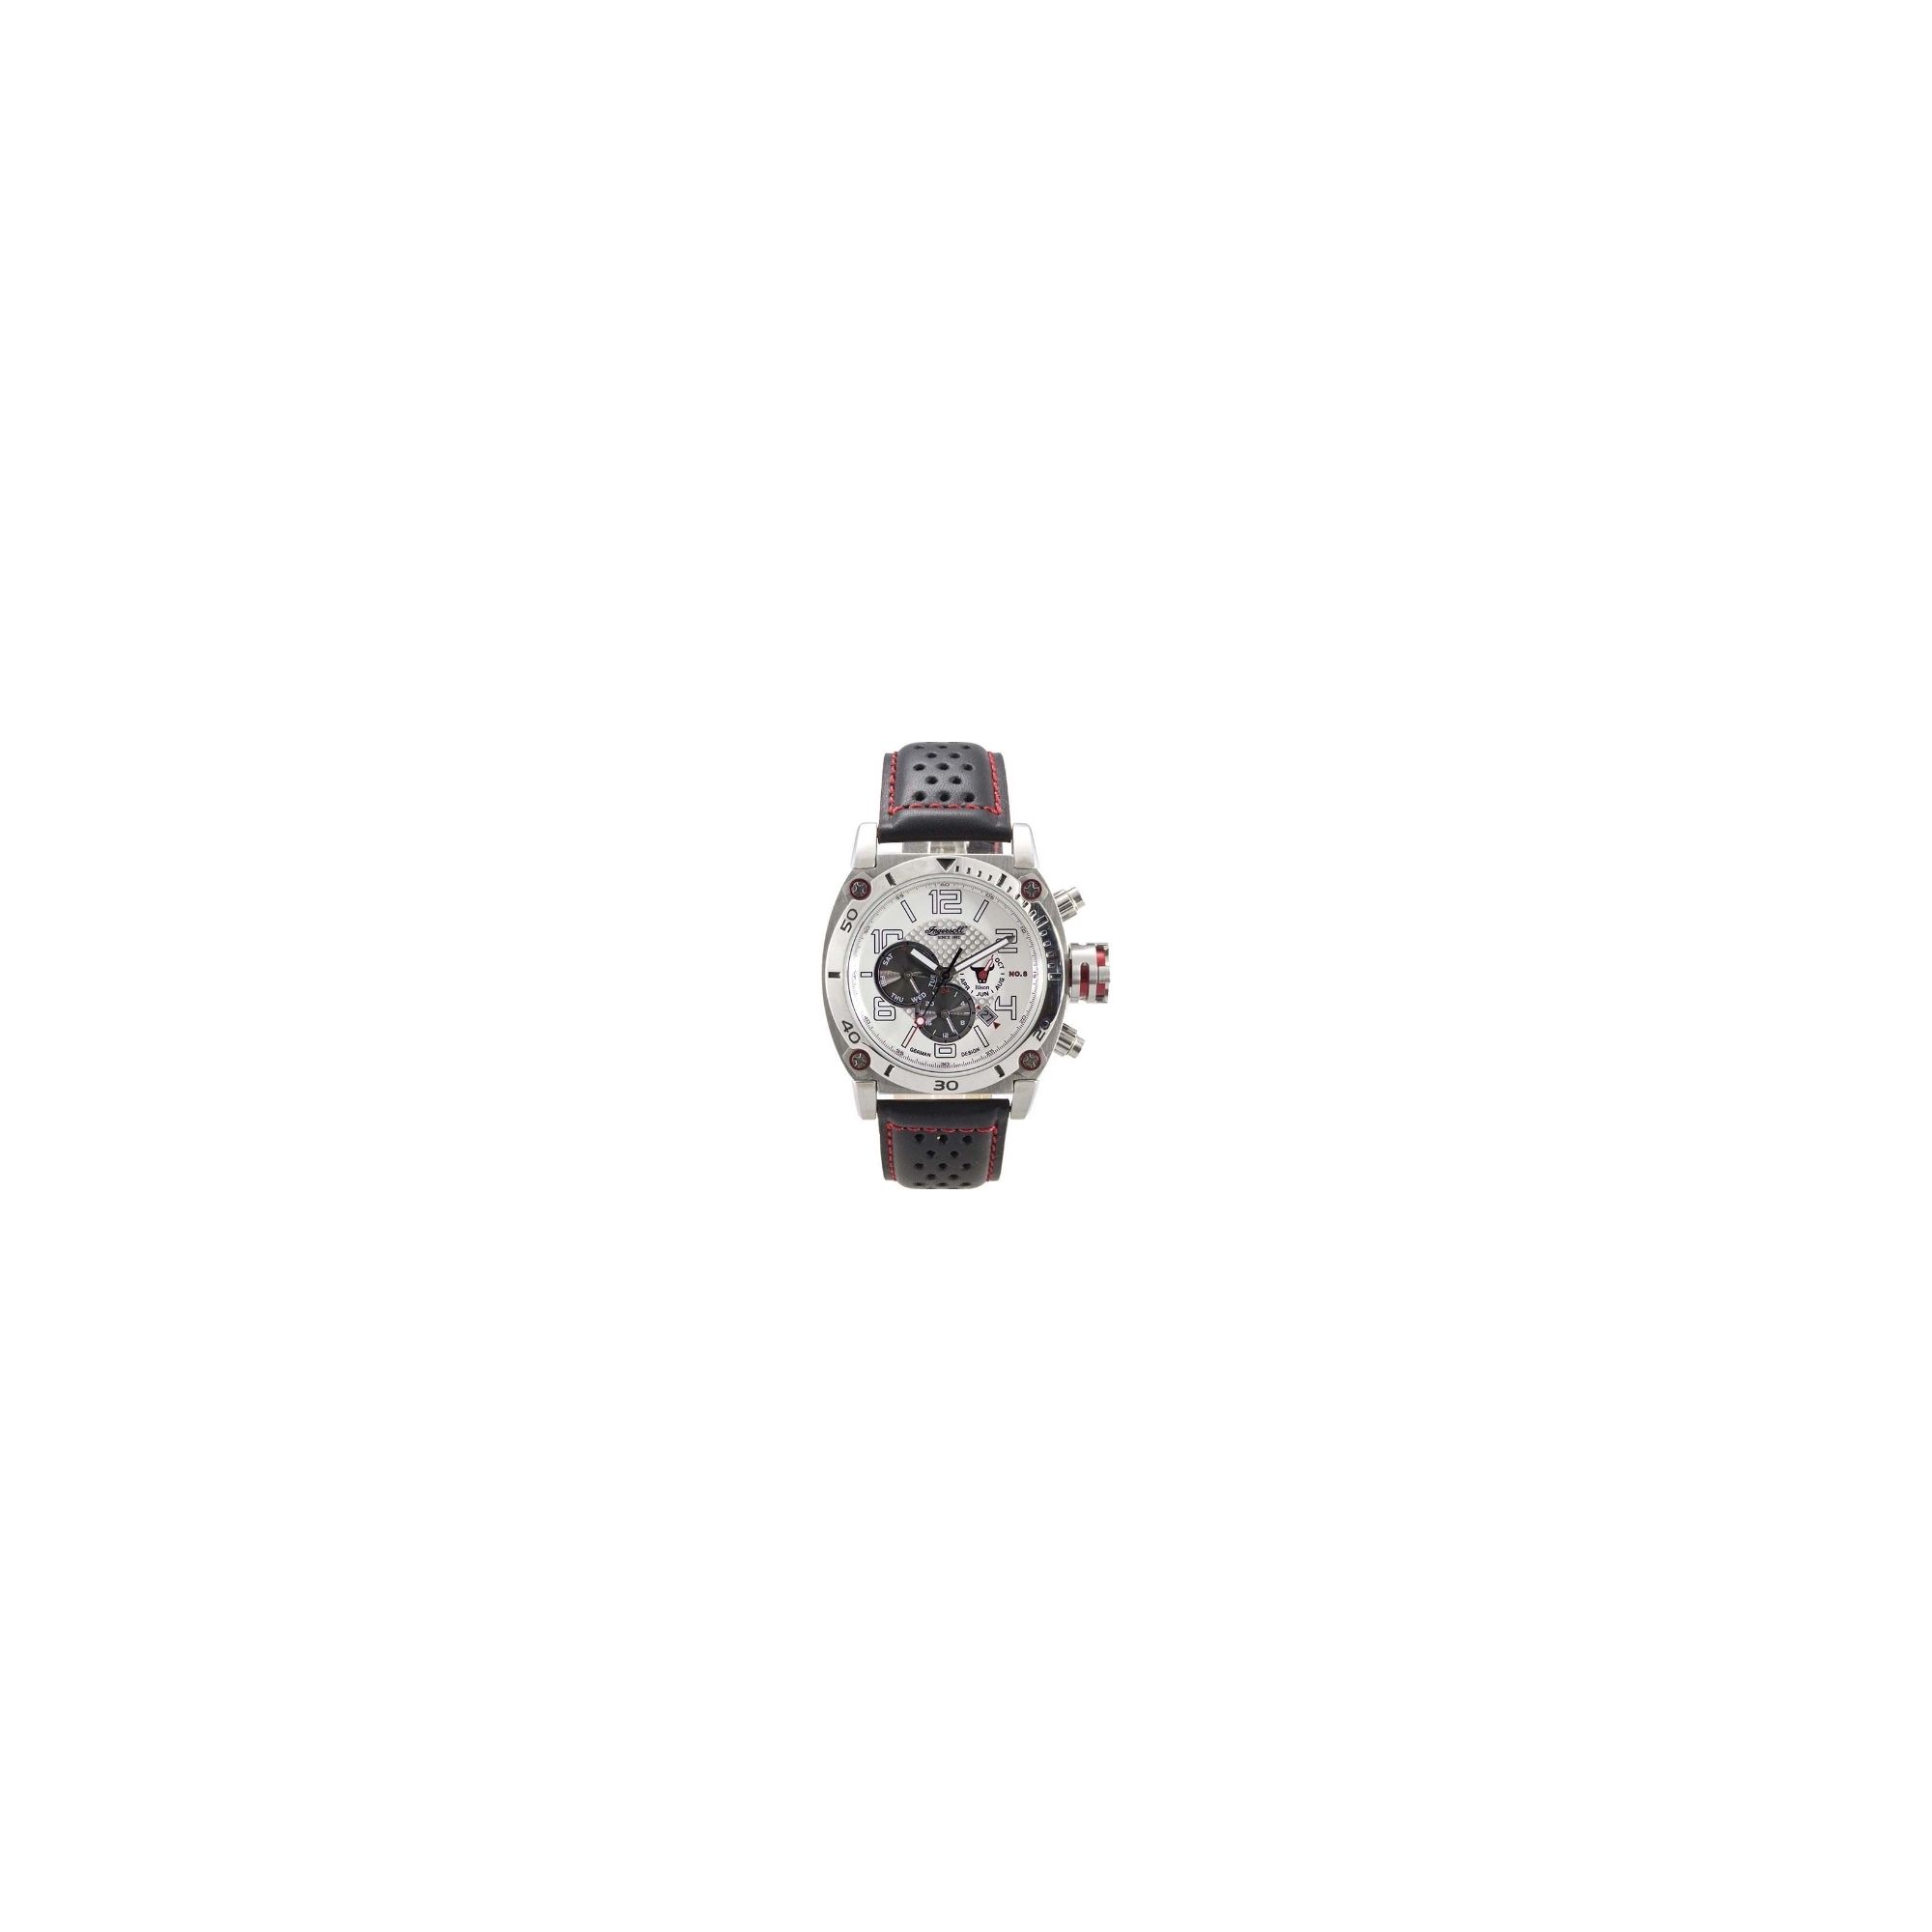 Ingersoll Bison No 8 Strap Watch IN2806WH at Tesco Direct